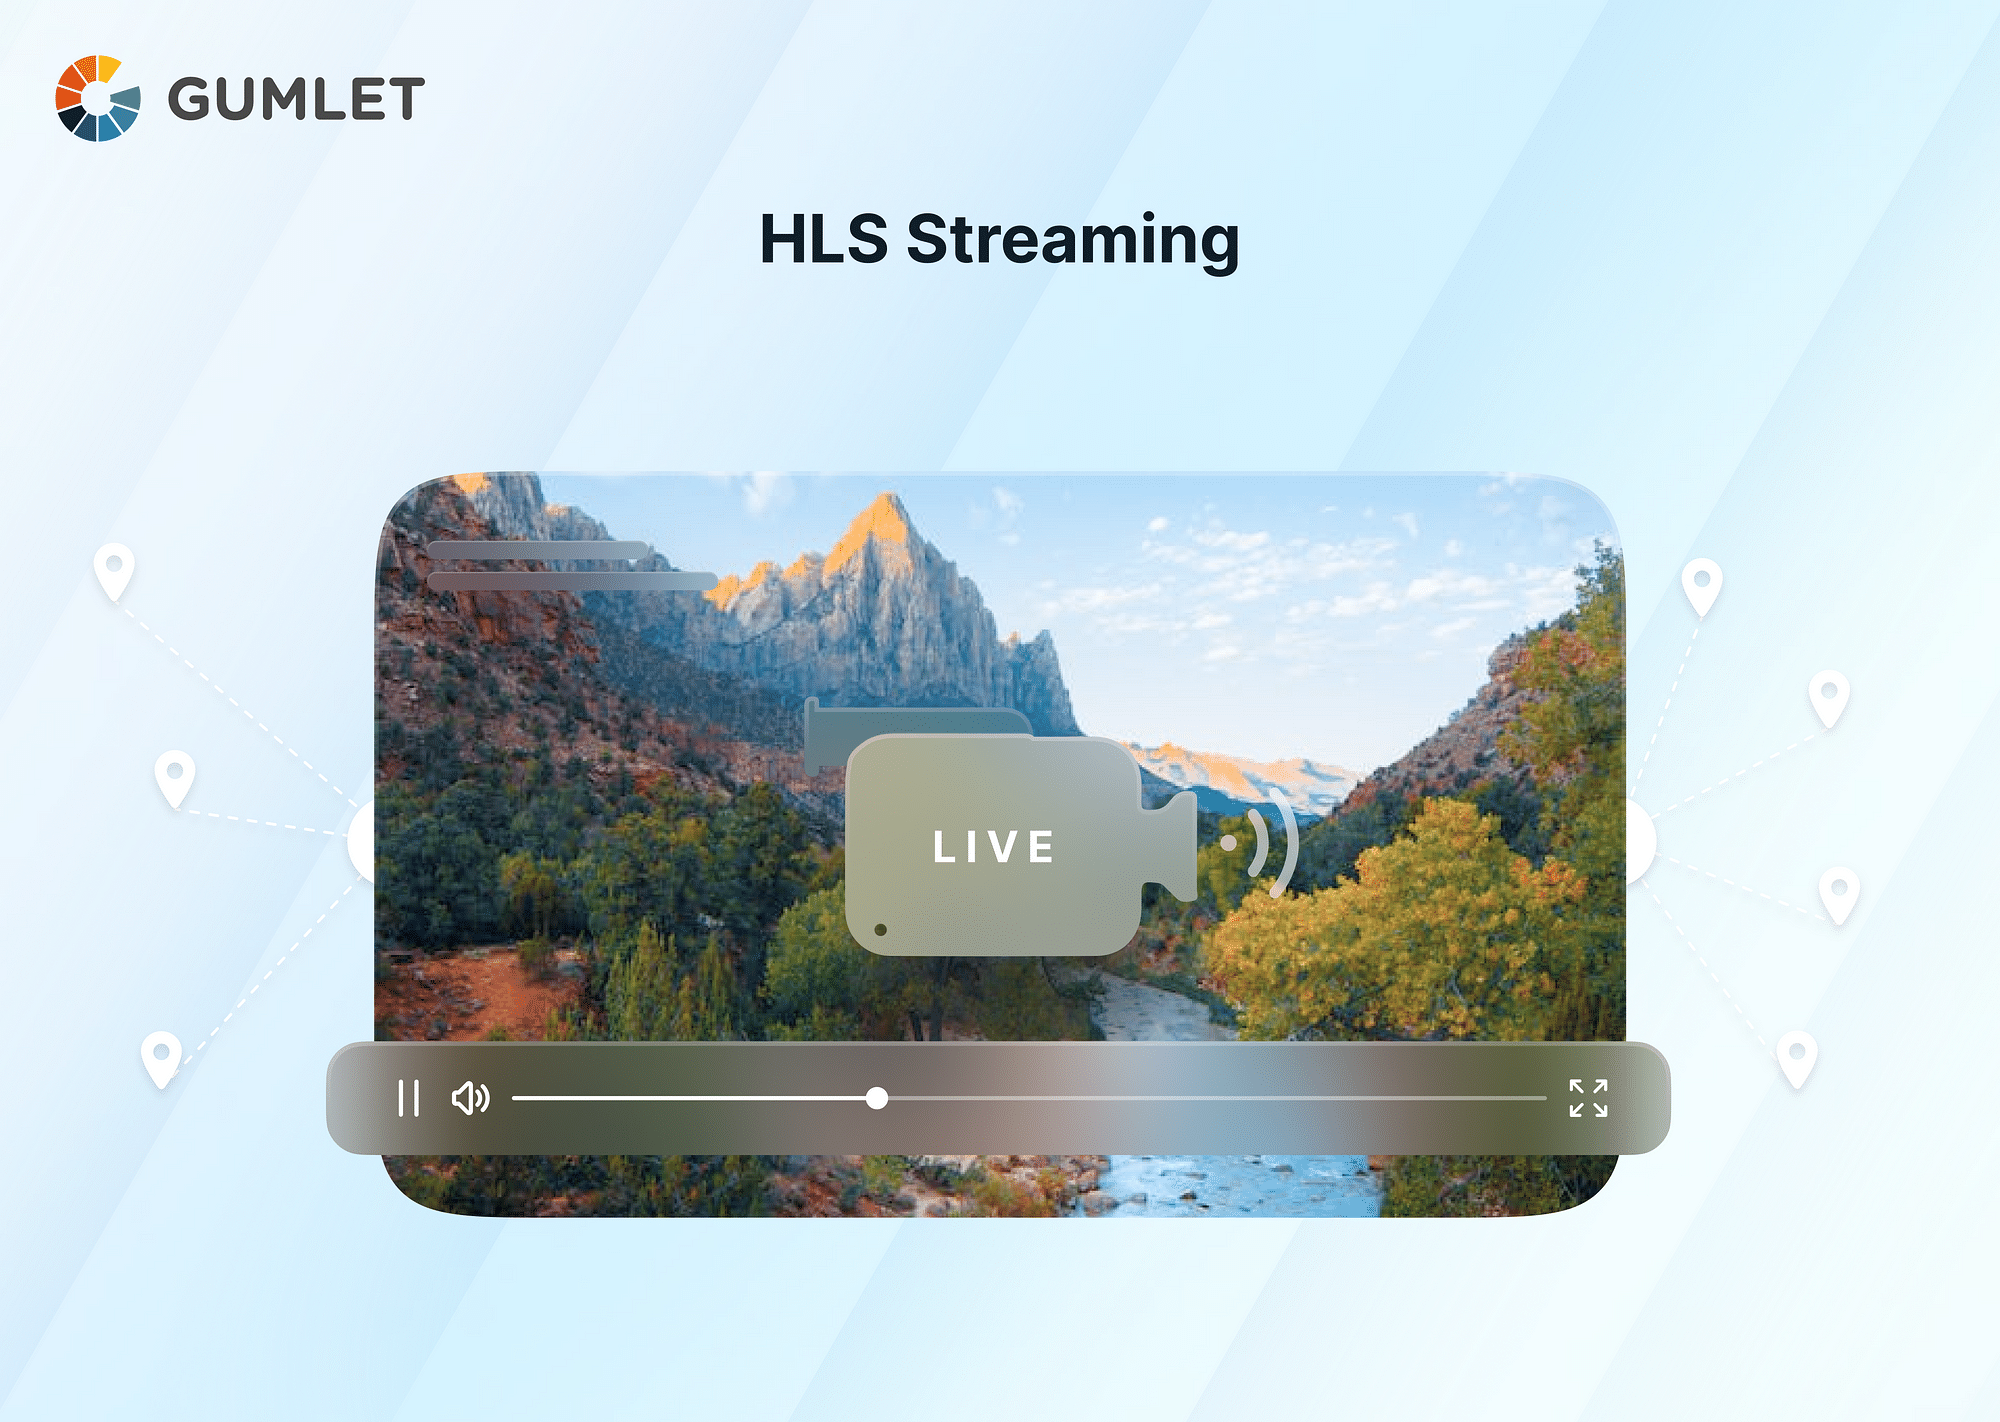 The Complete Guide to Streaming on  Live